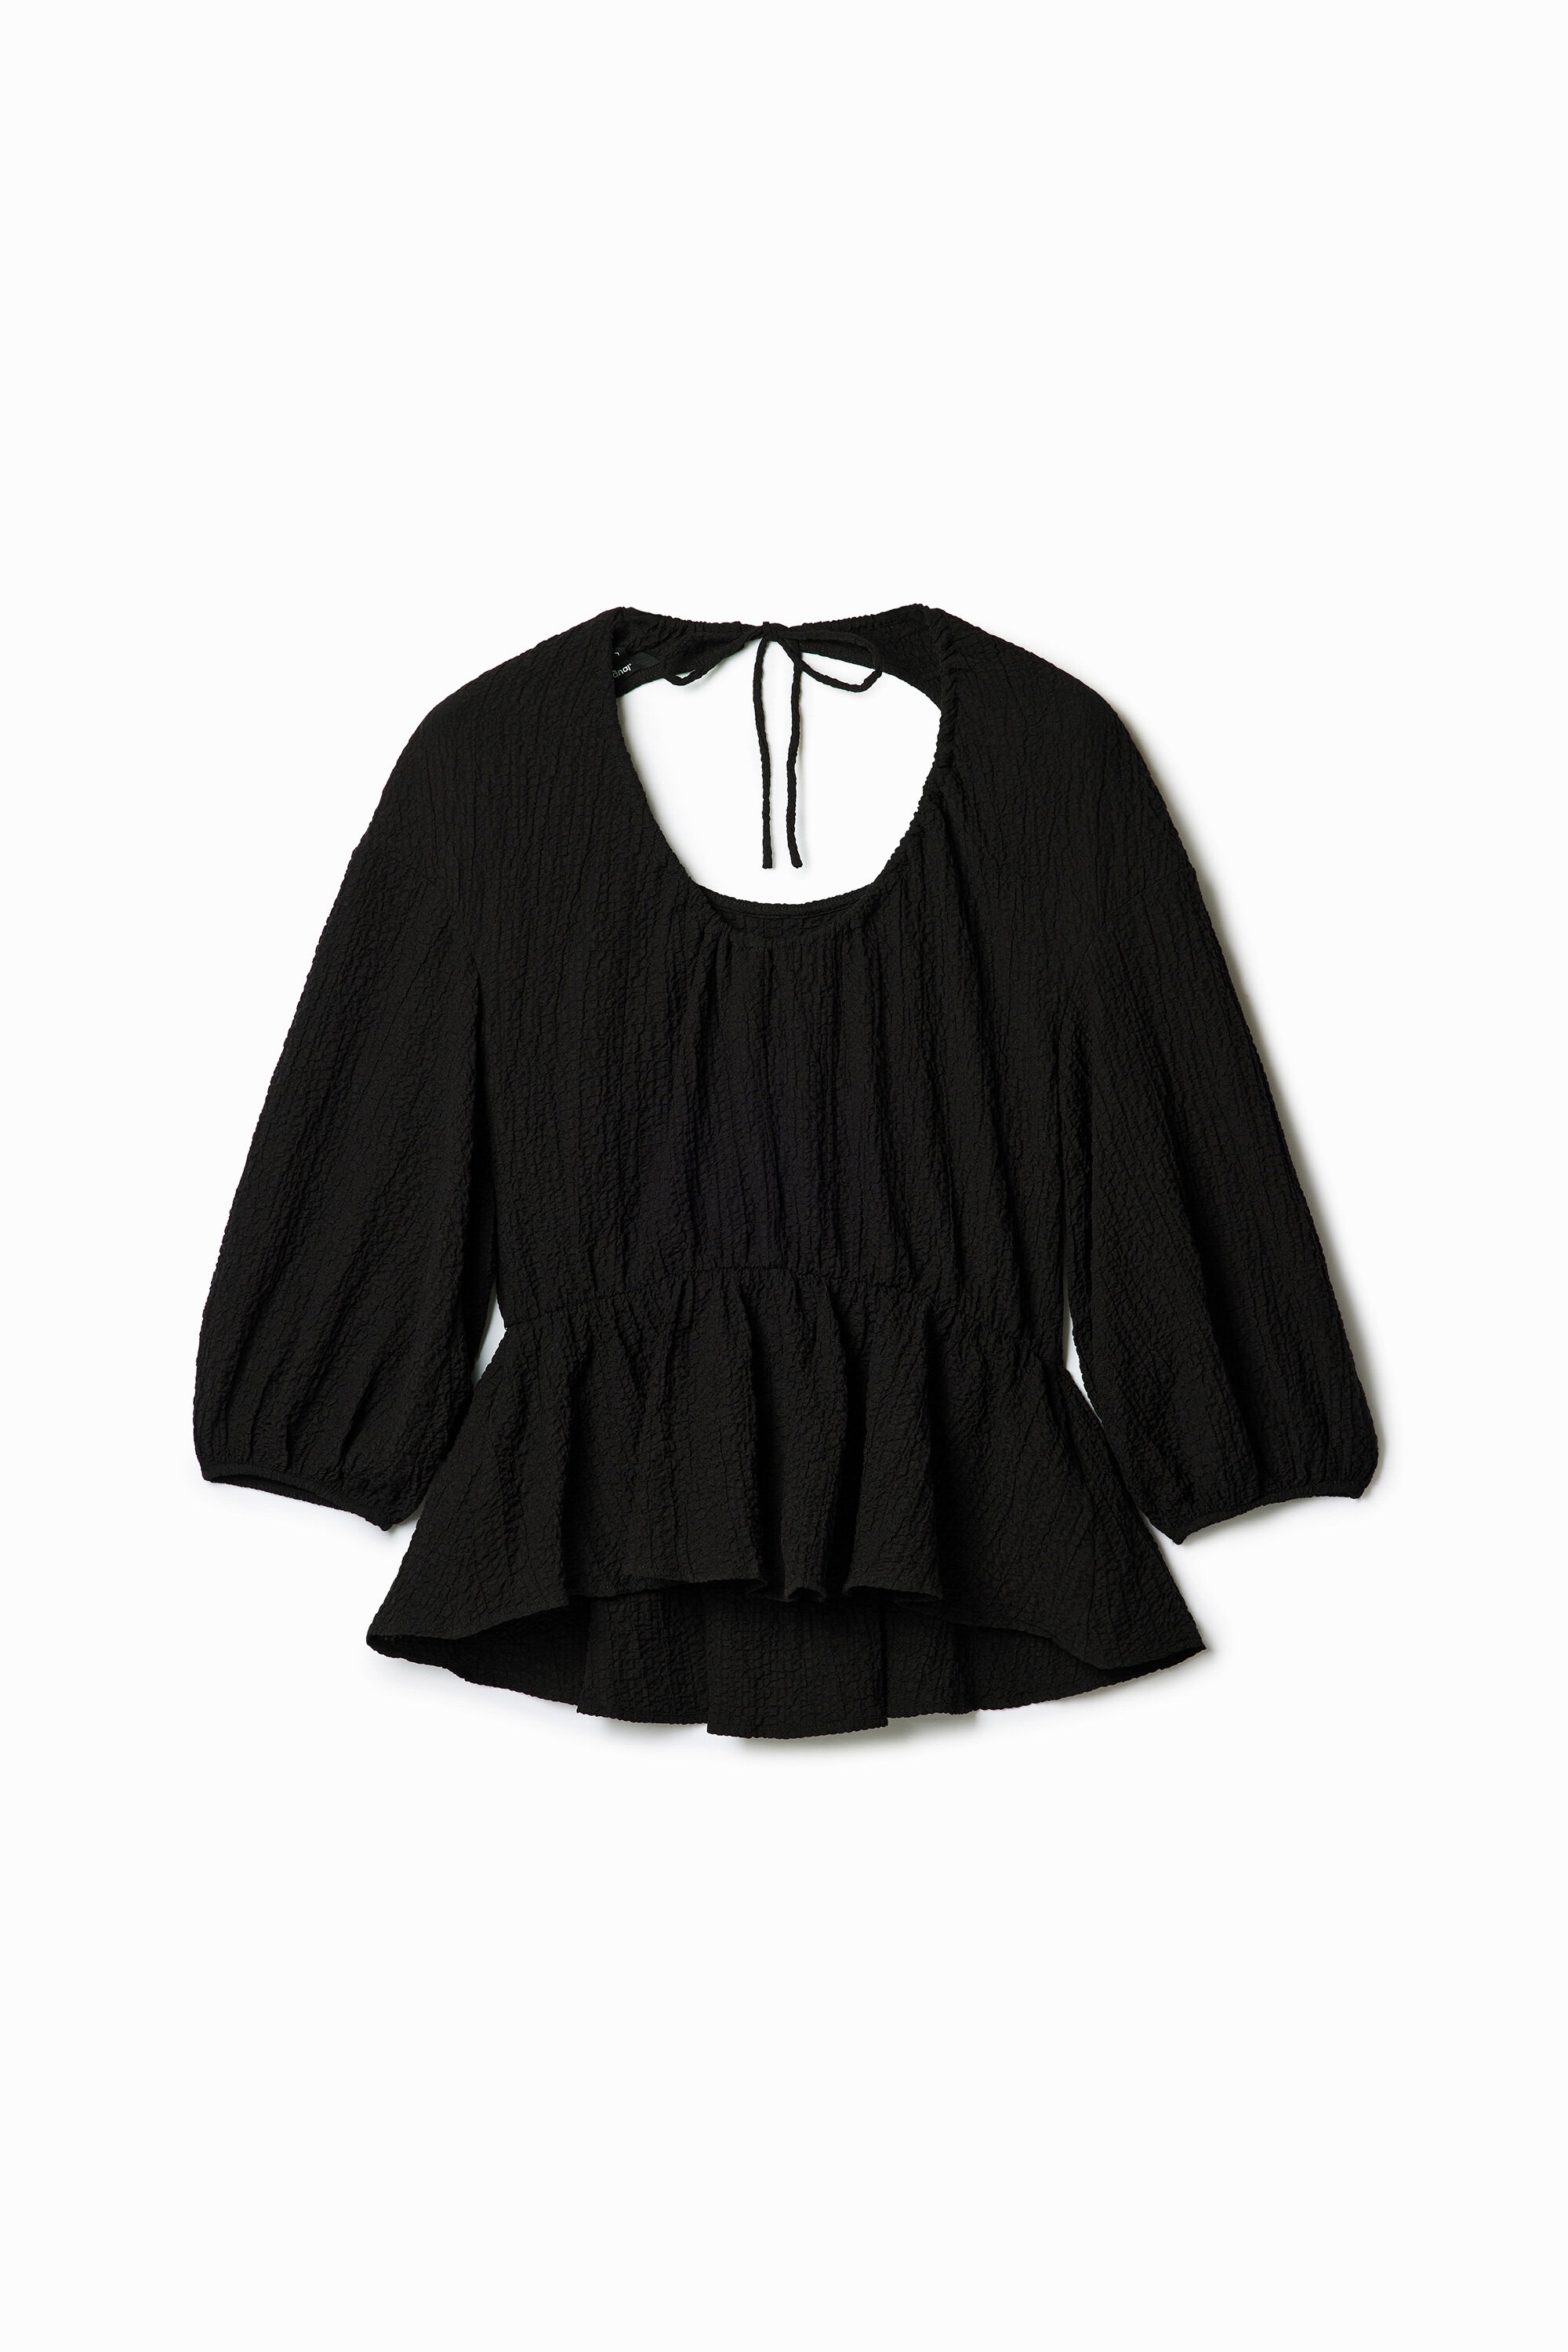 Desigual Textured Cut-out Blouse In Black